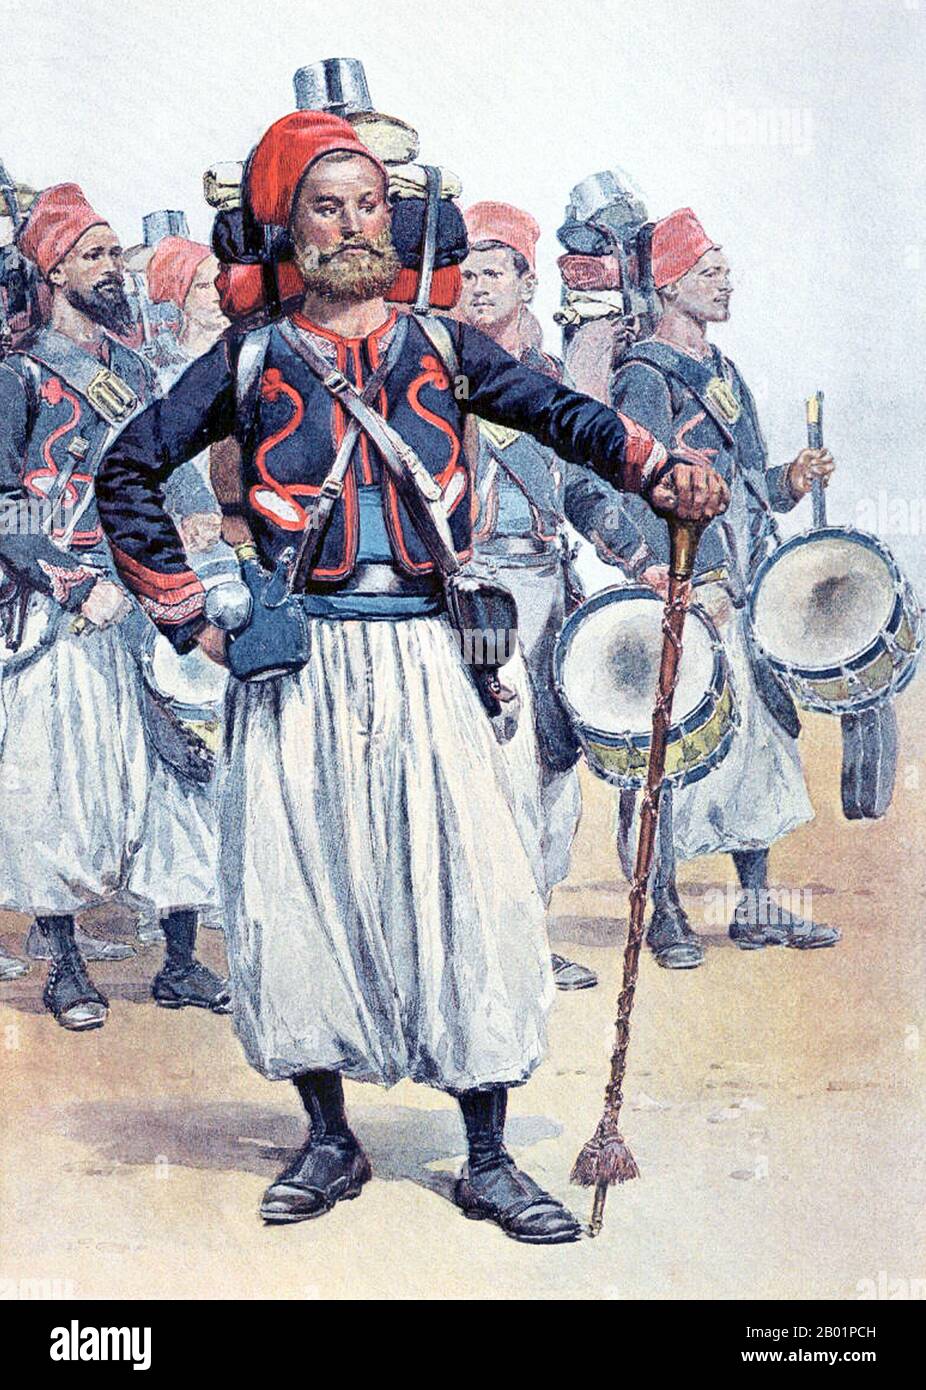 France: French Zouave Drum Major, North Africa. Lithograph by Jean-Baptiste Édouard Detaille (5 October 1848 - 23 December 1912),  1886.  Zouave was the title given to certain light infantry regiments in the French Army, normally serving in French North Africa between 1831 and 1962. The name was also adopted during the 19th century by units in other armies, especially volunteer regiments raised for service in the American Civil War. The chief distinguishing characteristics of such units were the zouave uniform, which included short open-fronted jackets, baggy trousers and oriental headgear. Stock Photo